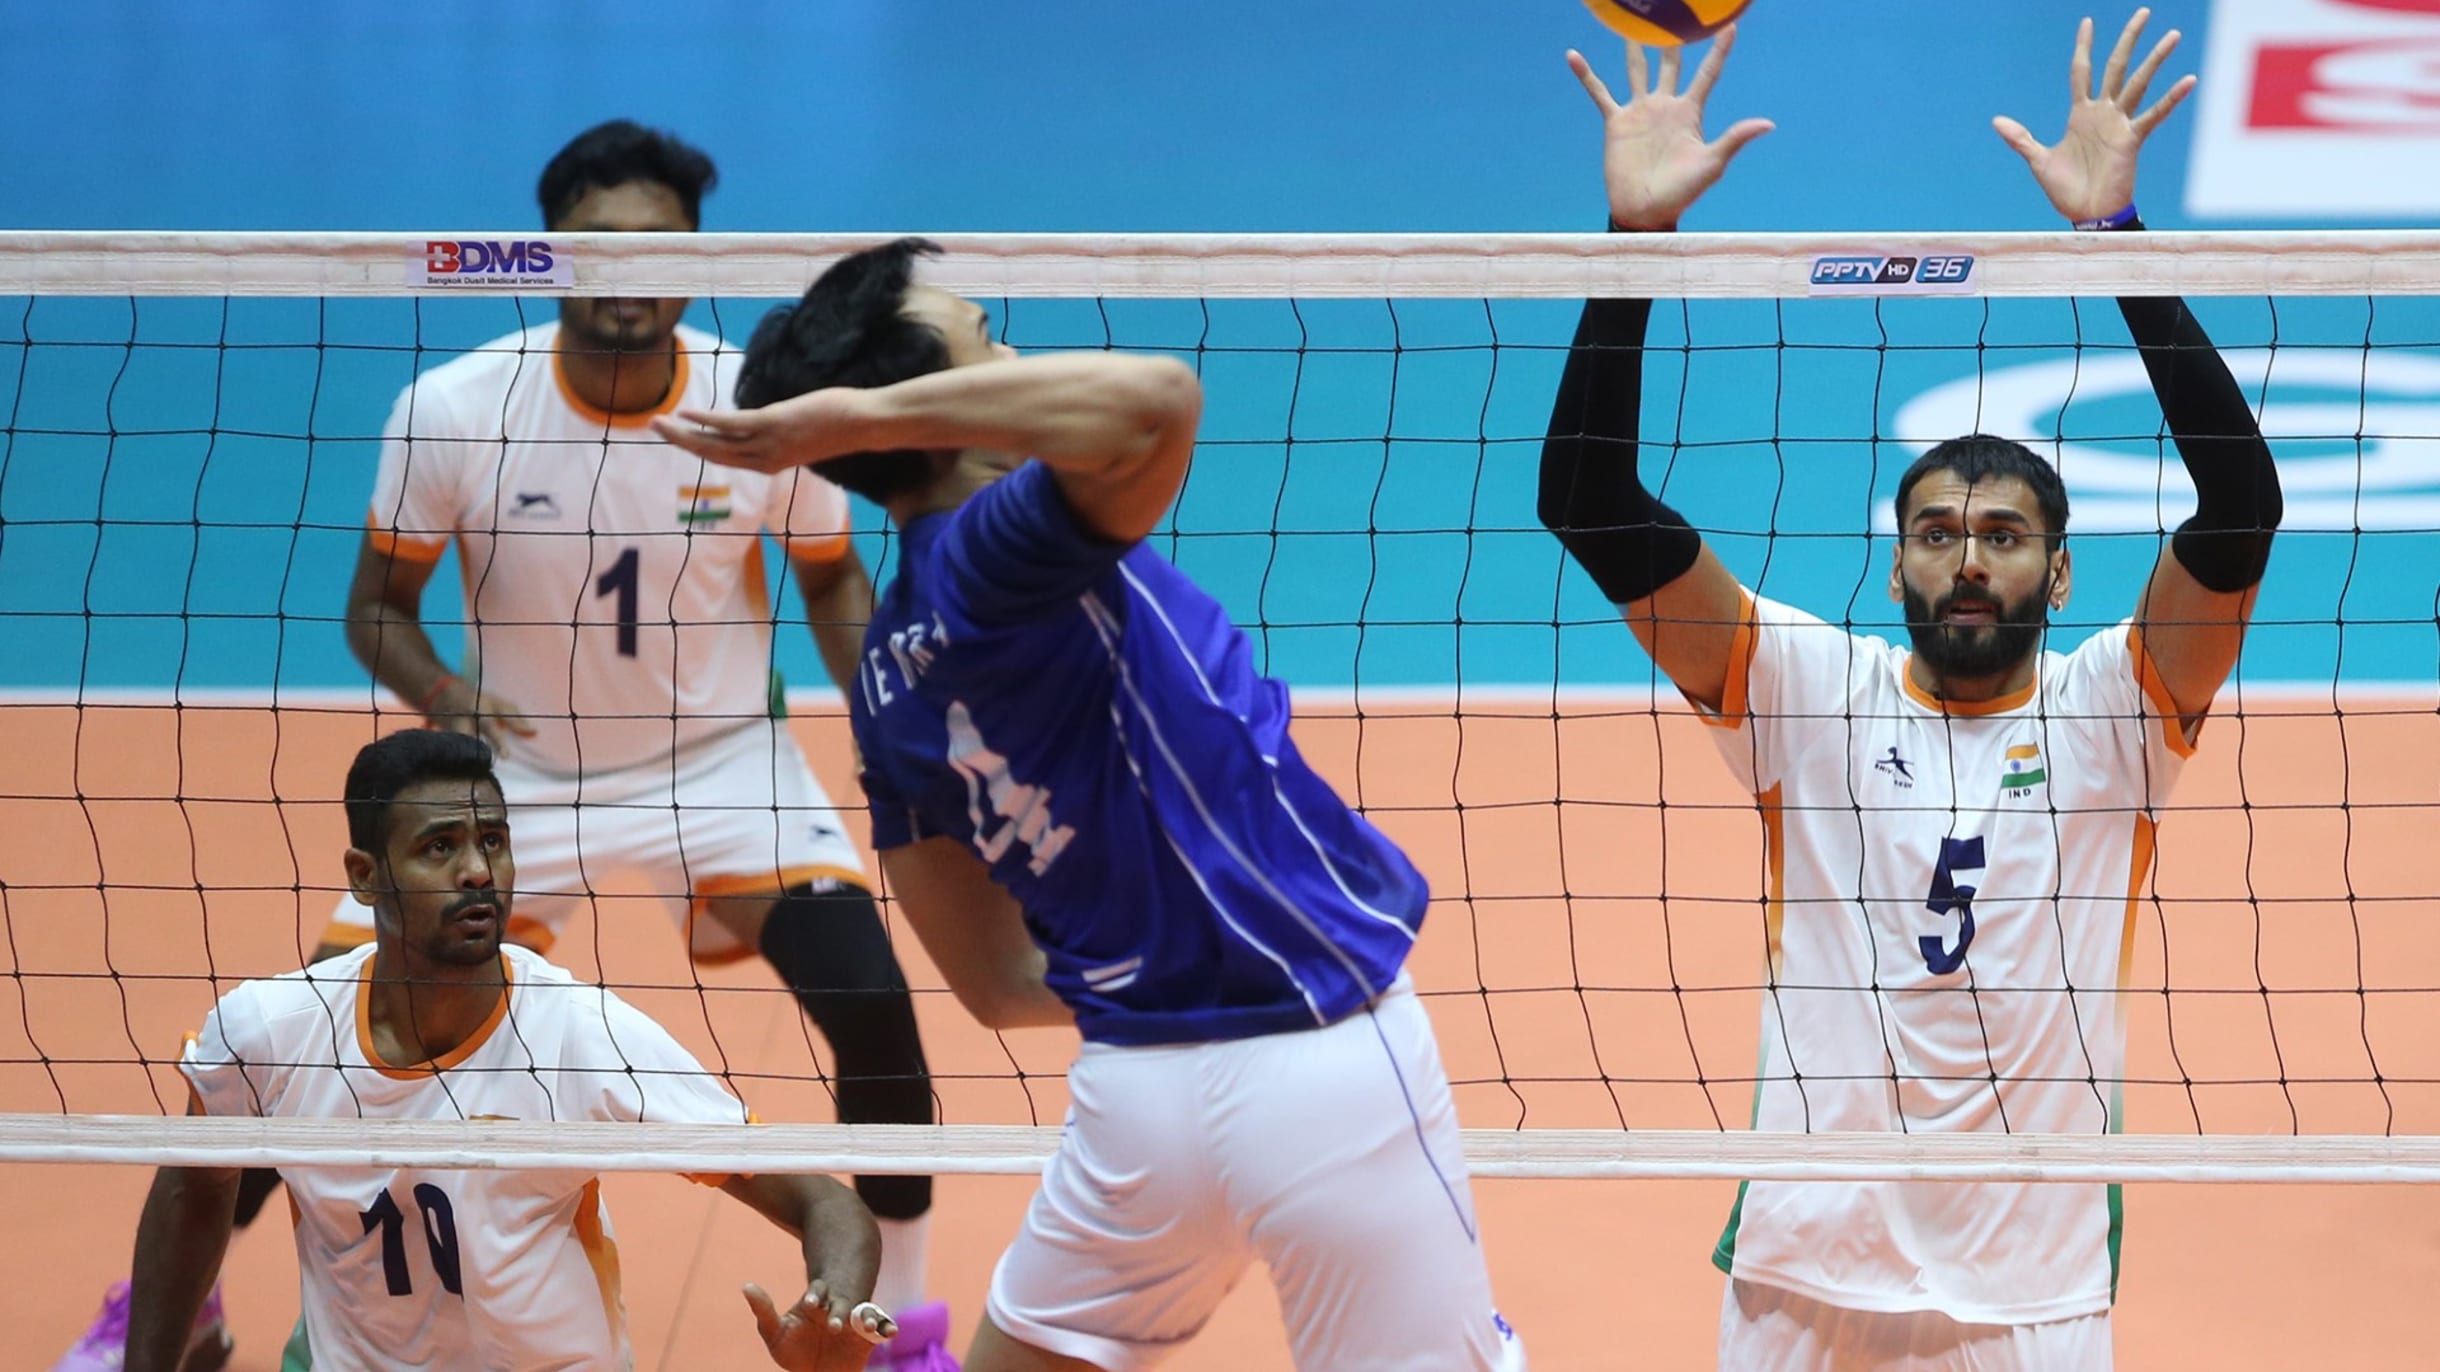 pptvhd36 volleyball live